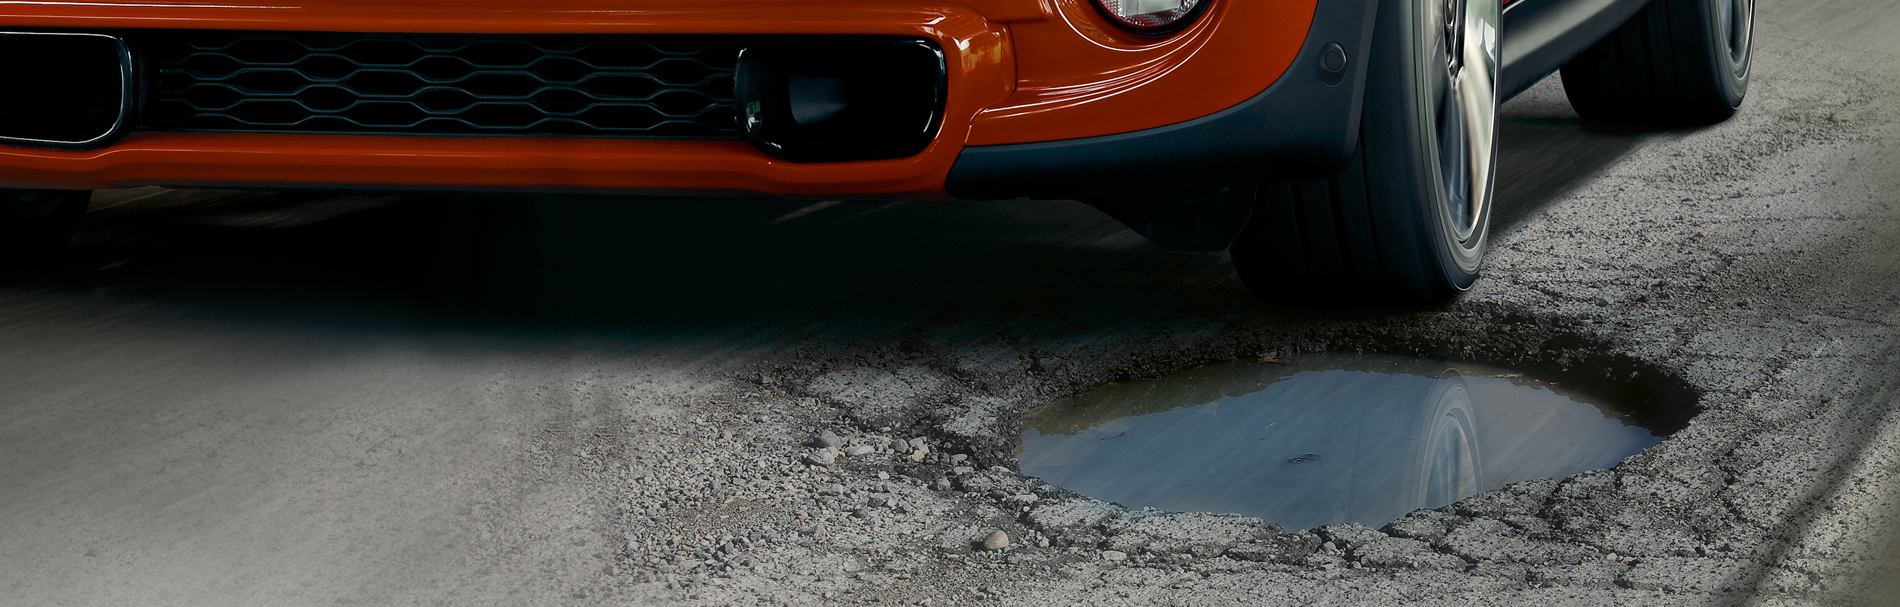 An extreme close-up of the front of an orange MINI Cooper Hardtop about to hit a large pothole on an asphalt road.